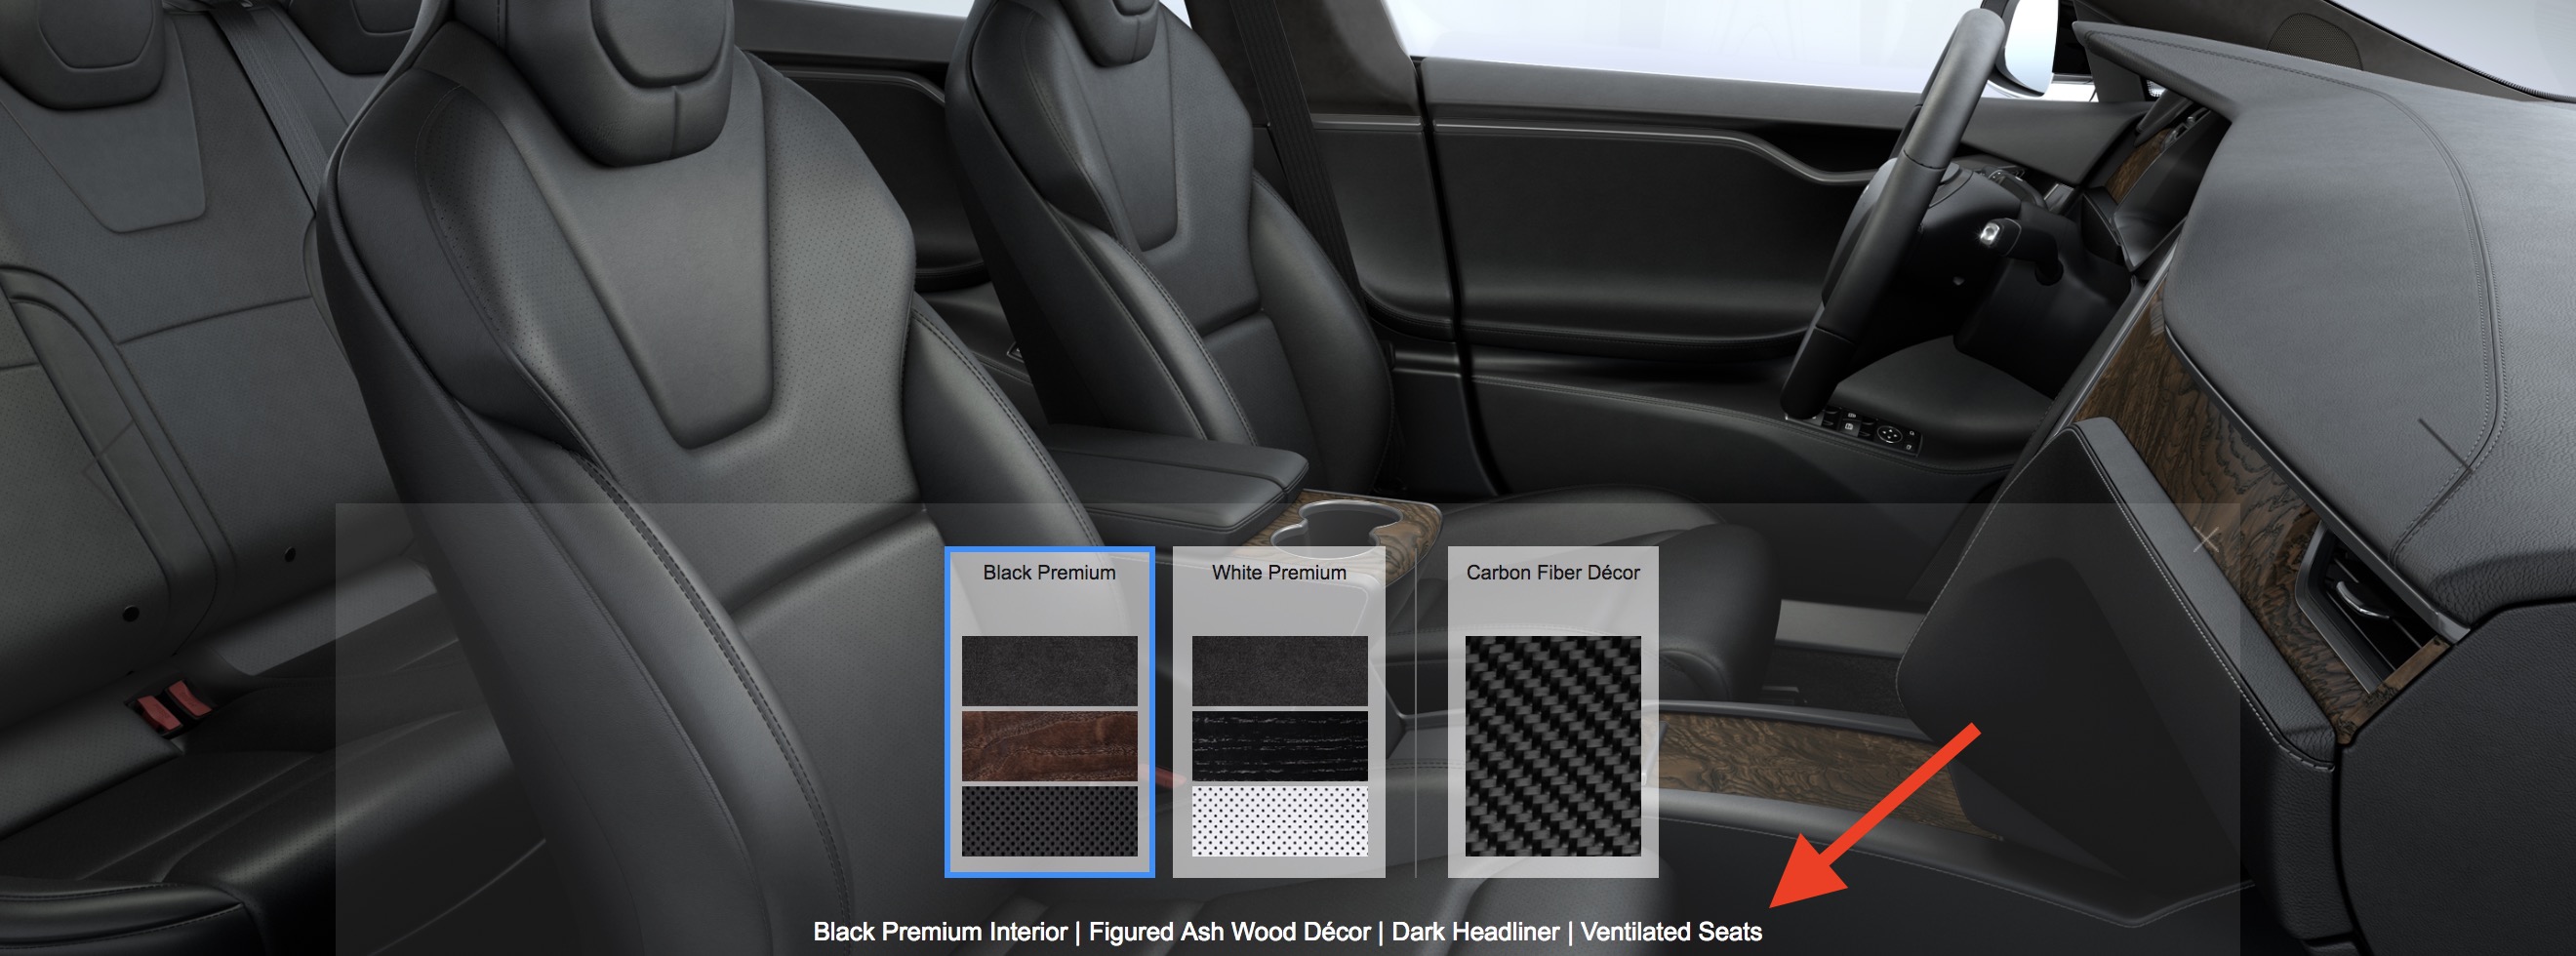 Tesla Brings Back Ventilated Seats And Makes New Black